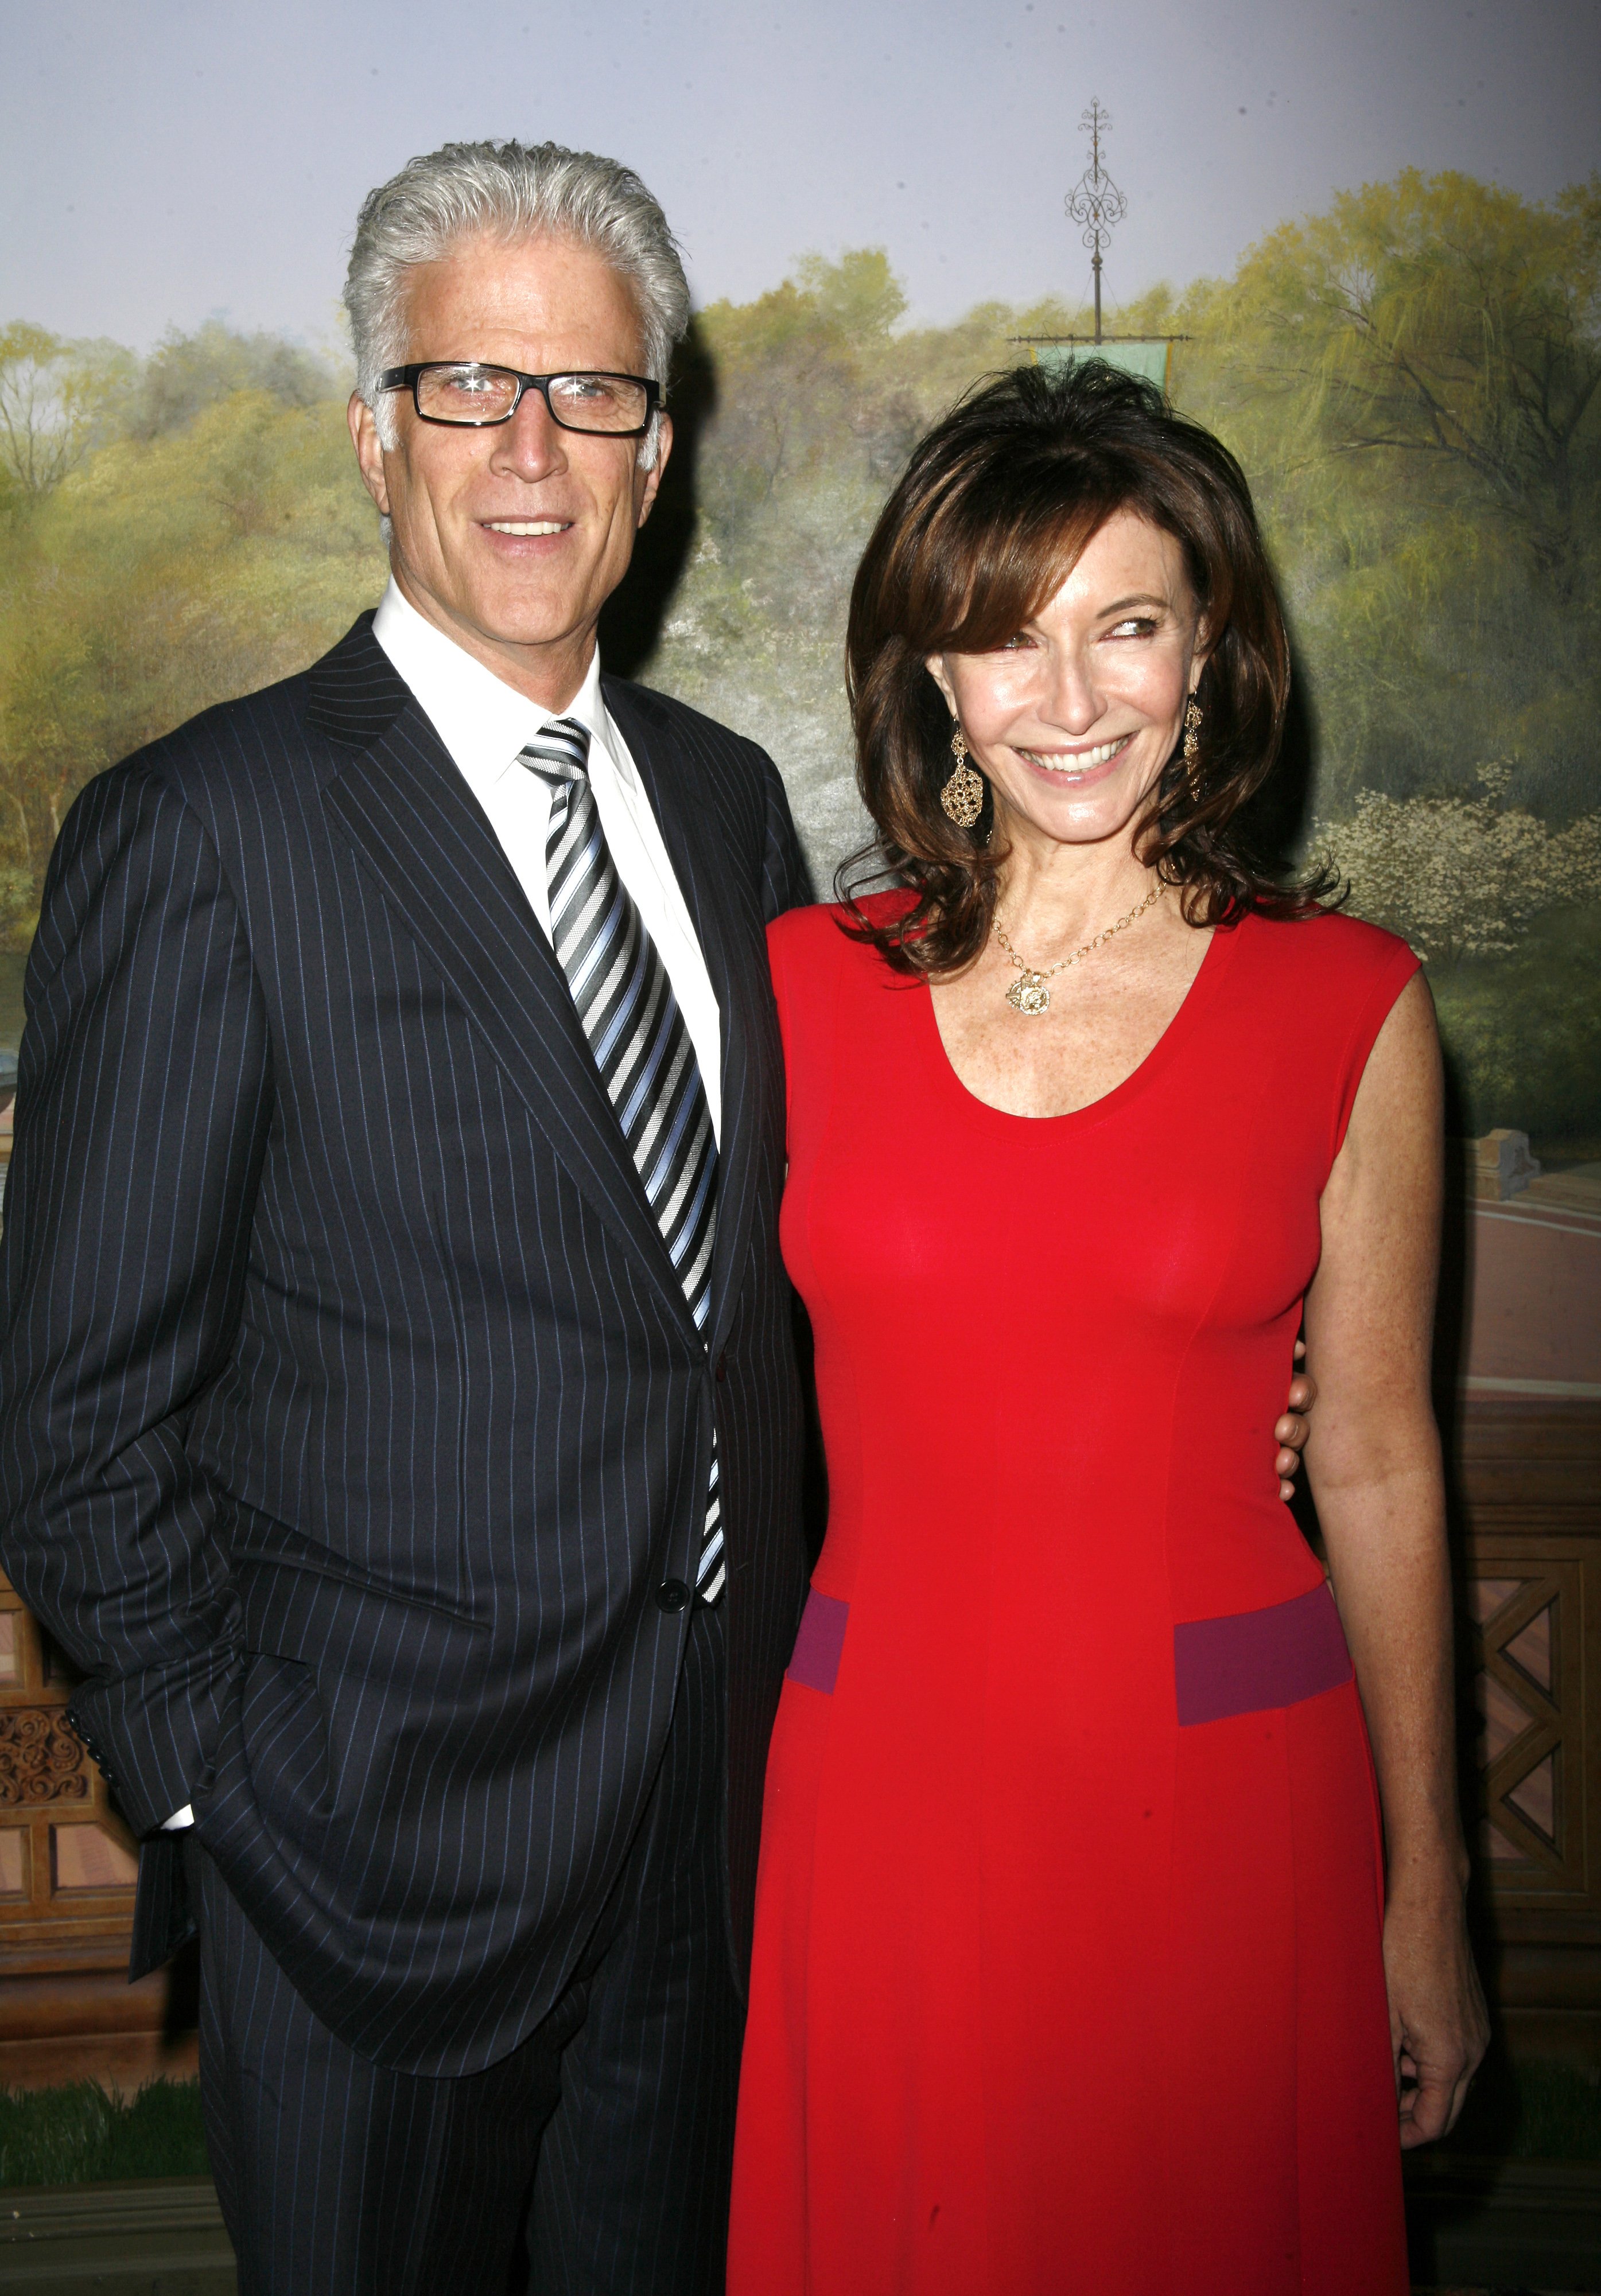 Ted Danson and Mary Steenburgen at the Neighborhood Playhouse School of the Theatre's 80th Anniversary Gala and Reunion in New York City, on November 9, 2008 | Source: Getty Images